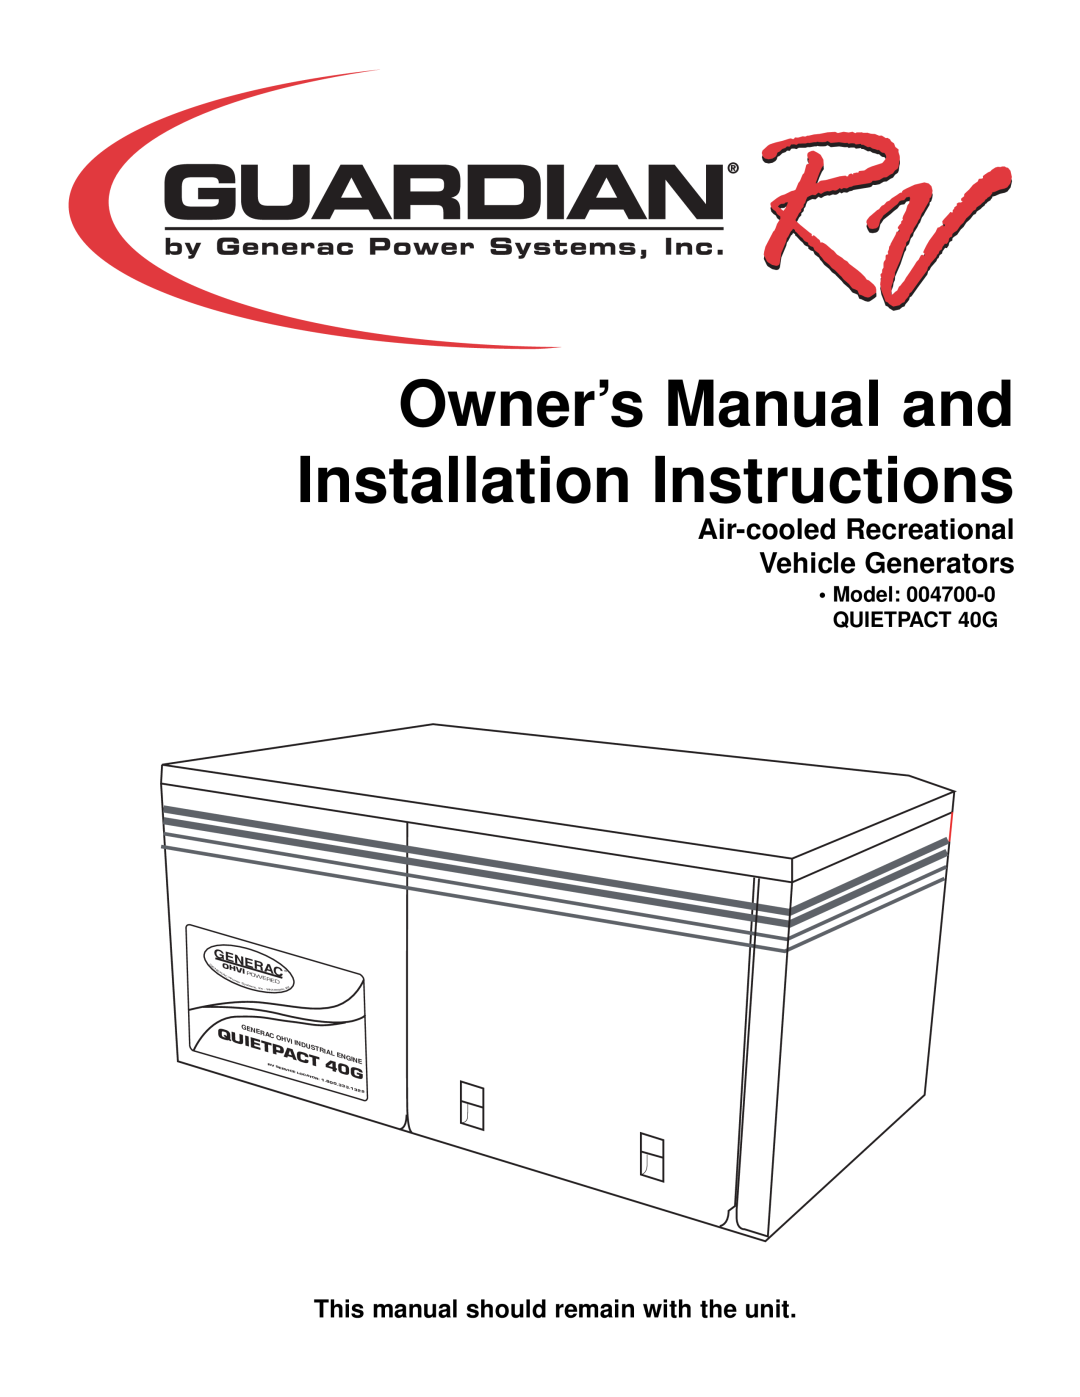 Generac 004700-0 owner manual Air-cooled Recreational Vehicle Generators, This manual should remain with the unit, 1322 